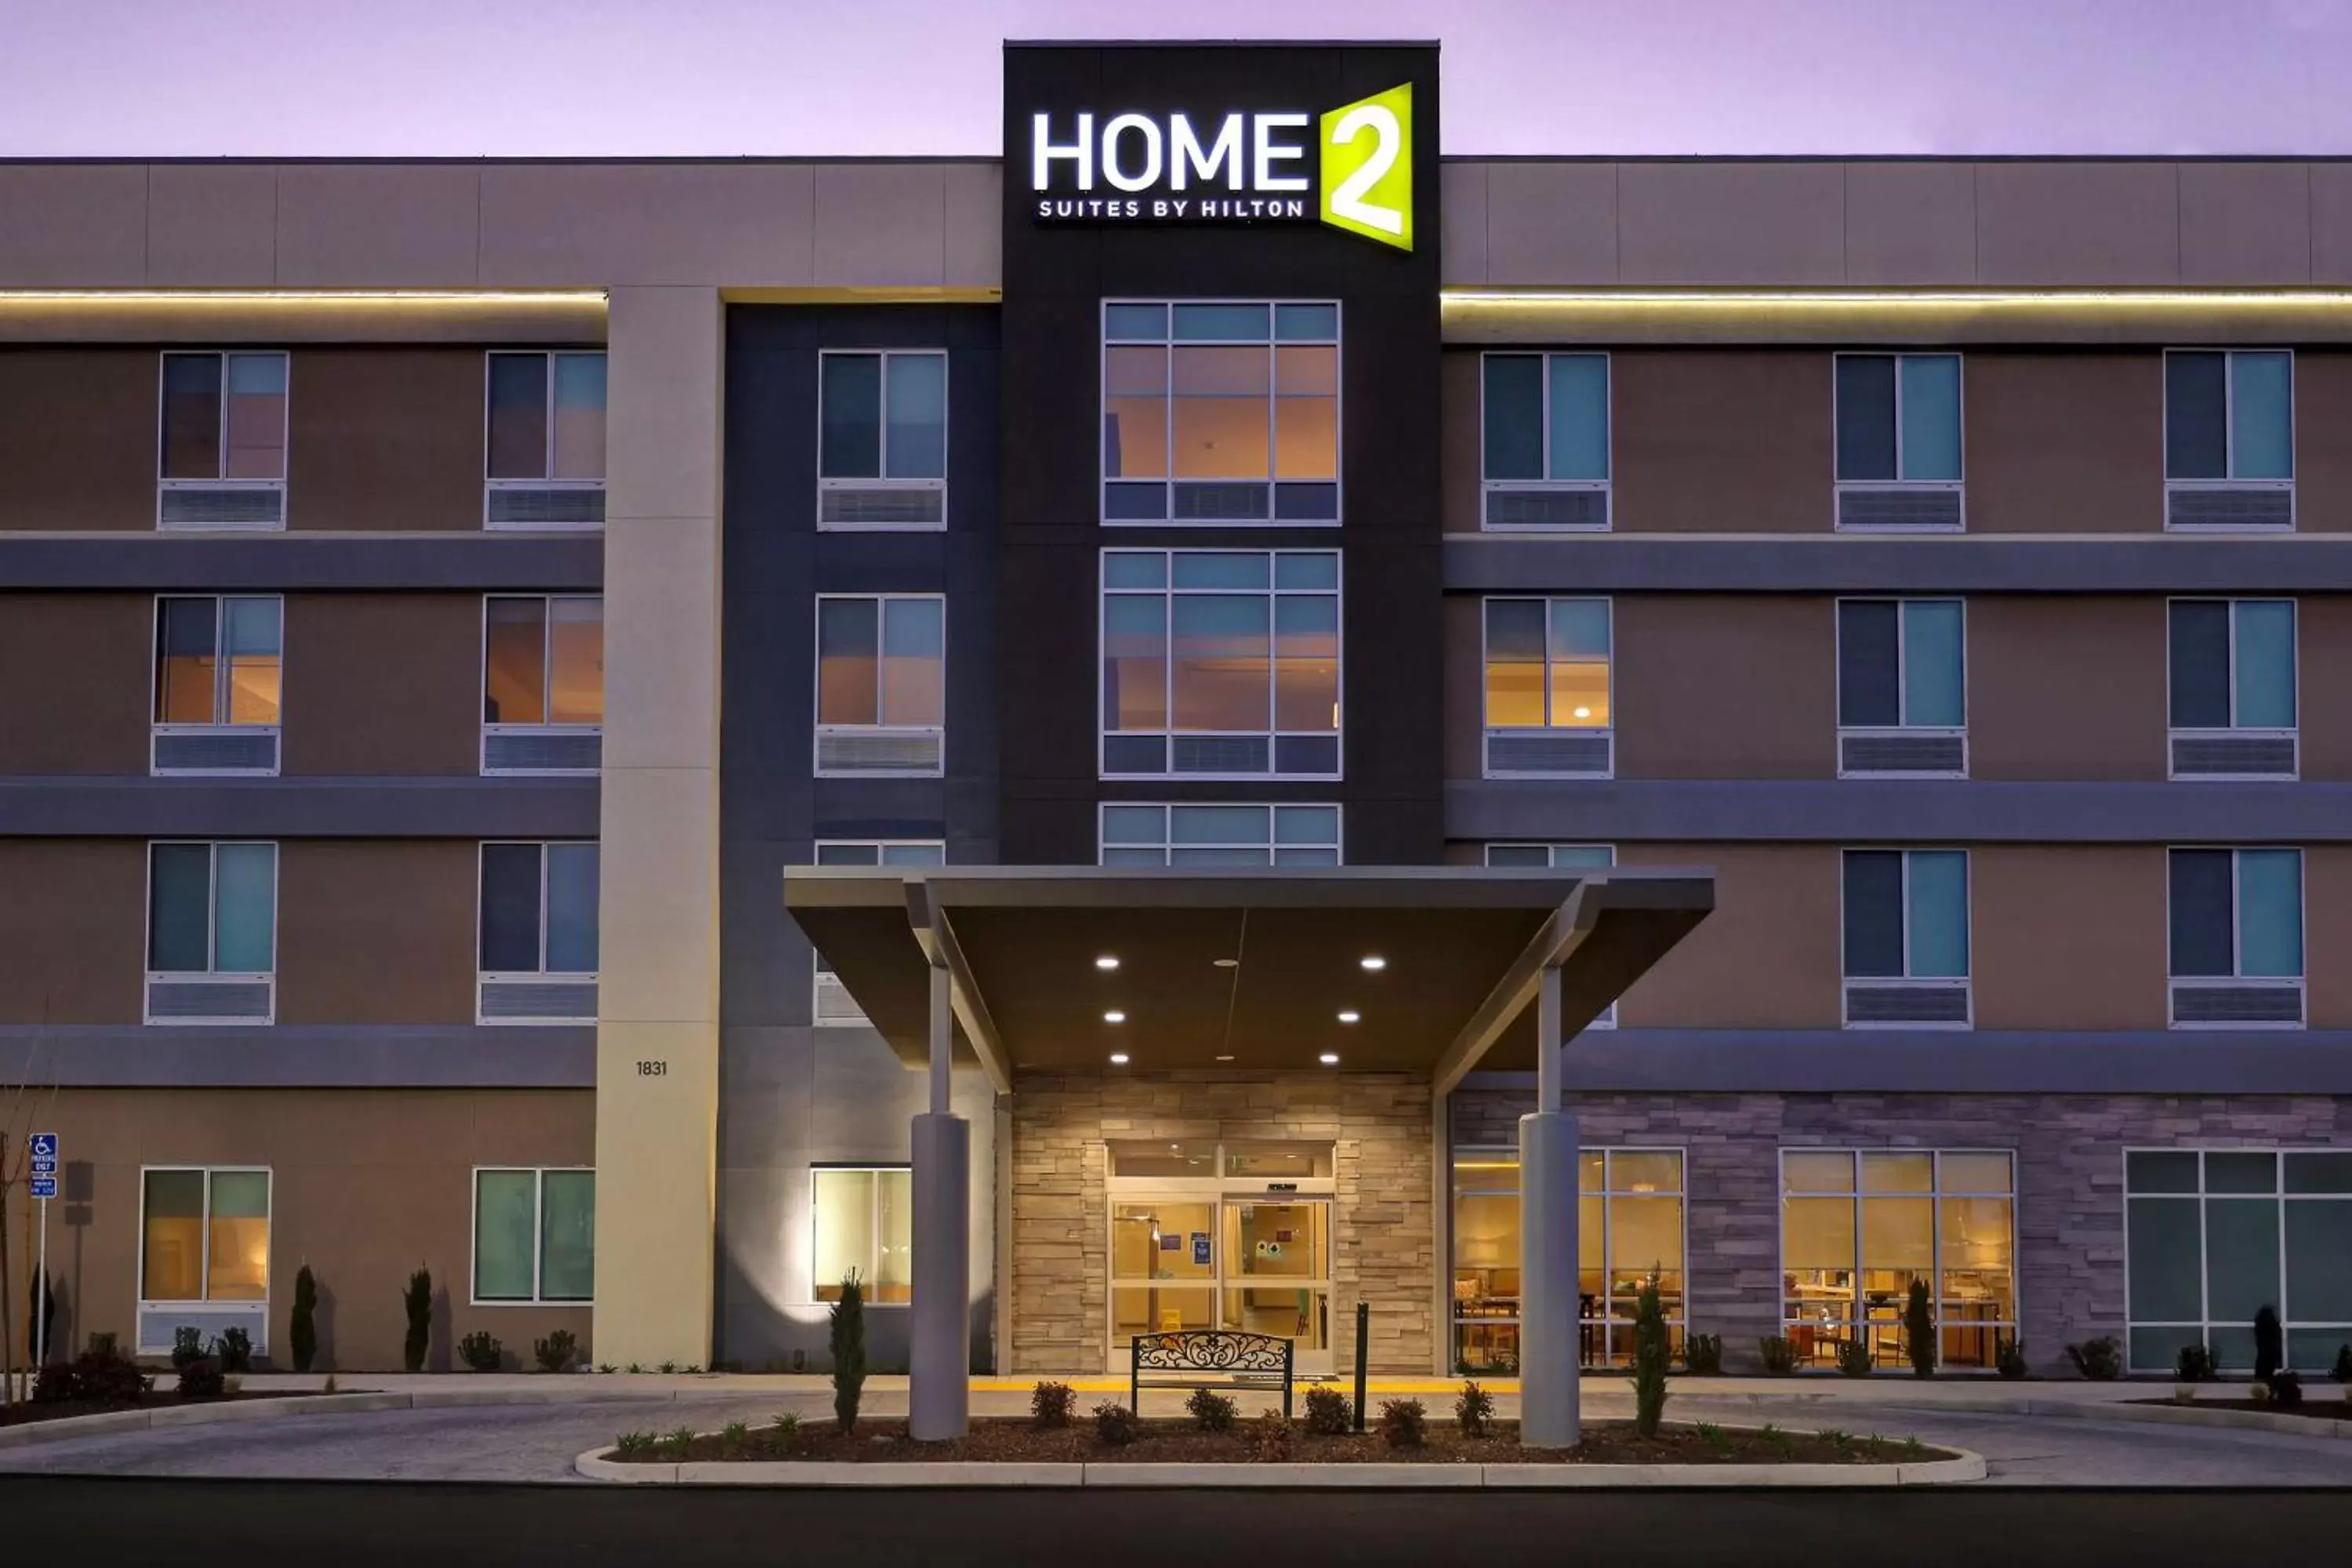 Property Building in Home2 Suites By Hilton Turlock, Ca